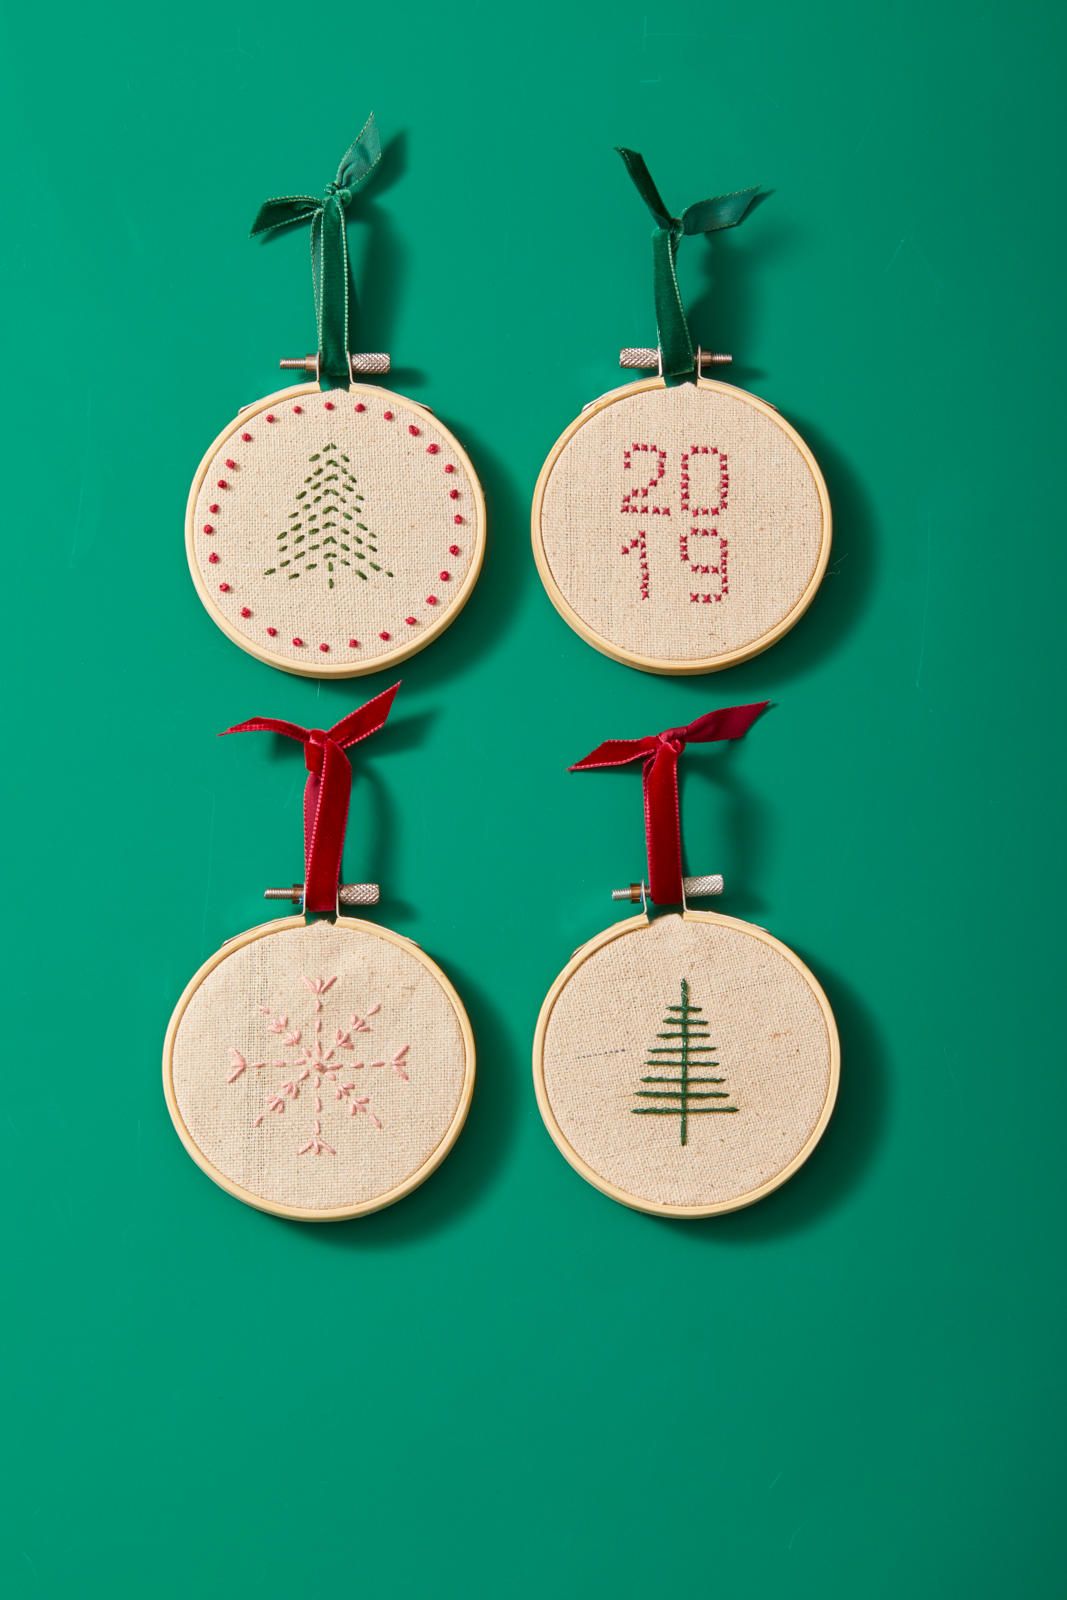 https://hips.hearstapps.com/hmg-prod/images/diy-christmas-gifts-embroidery-hoop-ornaments-1571340085.jpeg